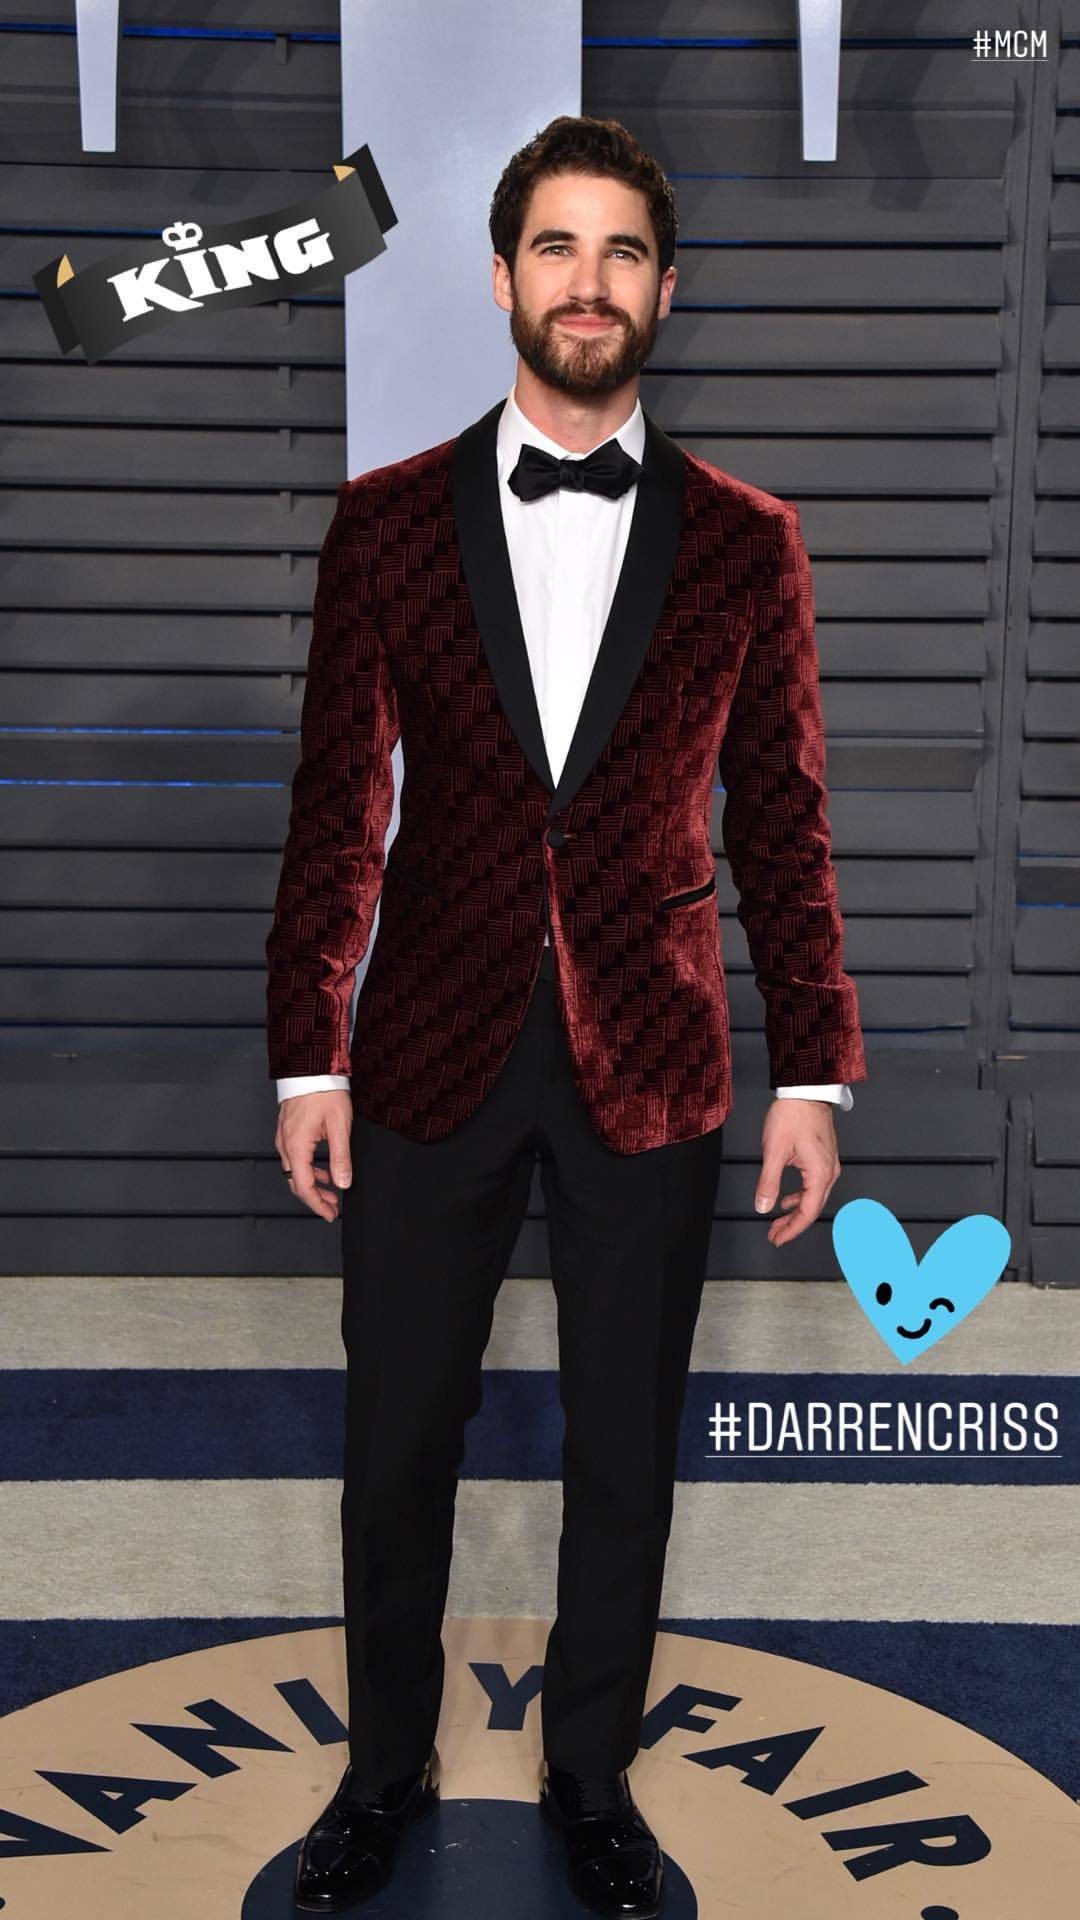 GoldenGlobes - Darren's Miscellaneous Projects and Events for 2018 - Page 3 Tumblr_p67xapBh3g1wpi2k2o1_1280